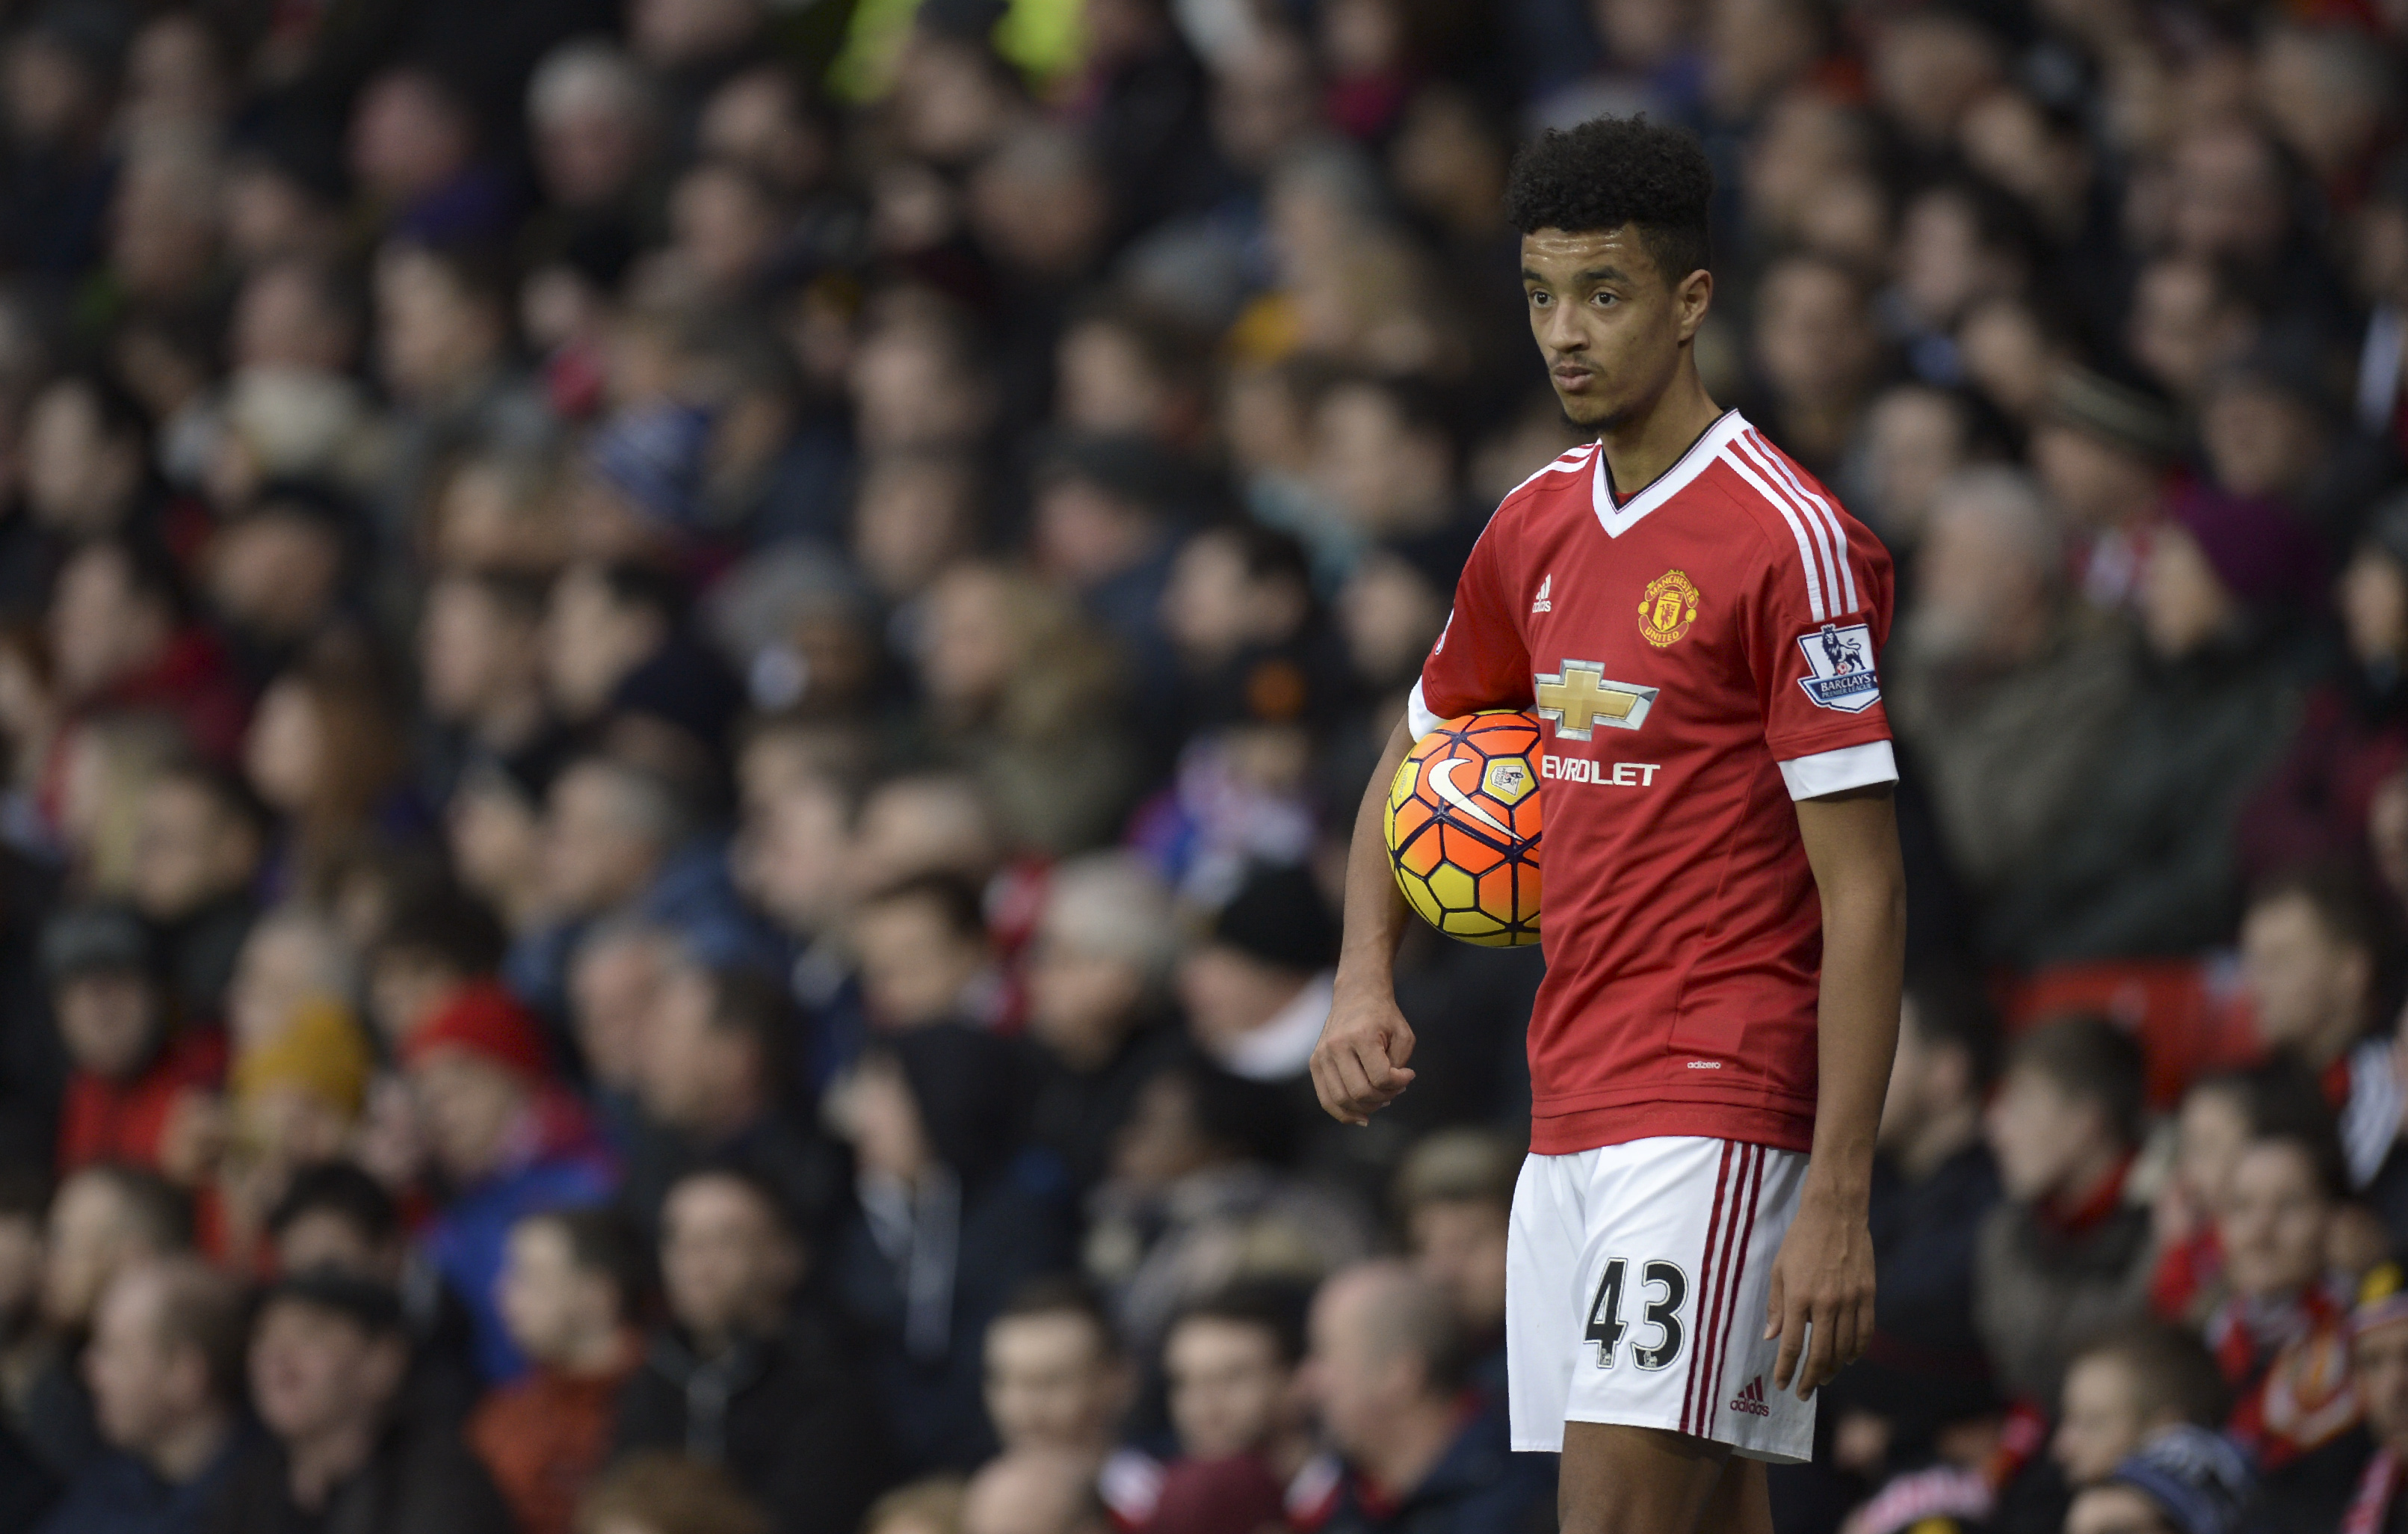 Manchester United's English defender Cameron Borthwick-Jackson prepares to take a throw in during the English Premier League football match between Manchester United and Southampton at Old Trafford in Manchester, north west England, on January 23, 2016. AFP PHOTO / OLI SCARFF

RESTRICTED TO EDITORIAL USE. No use with unauthorized audio, video, data, fixture lists, club/league logos or 'live' services. Online in-match use limited to 75 images, no video emulation. No use in betting, games or single club/league/player publications. / AFP / OLI SCARFF        (Photo credit should read OLI SCARFF/AFP/Getty Images)